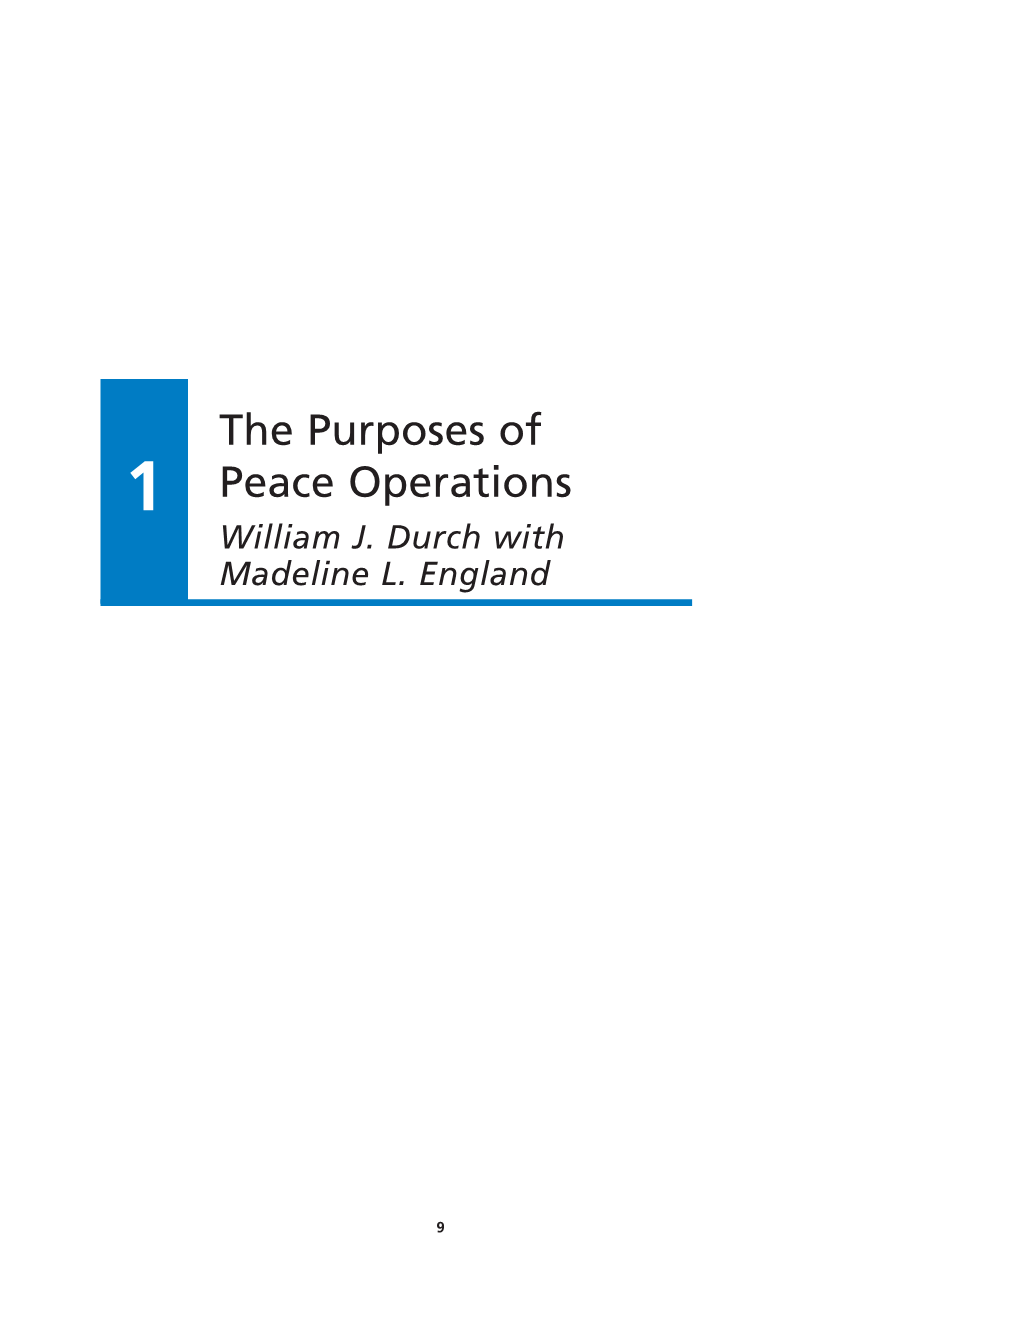 The Purposes of Peace Operations